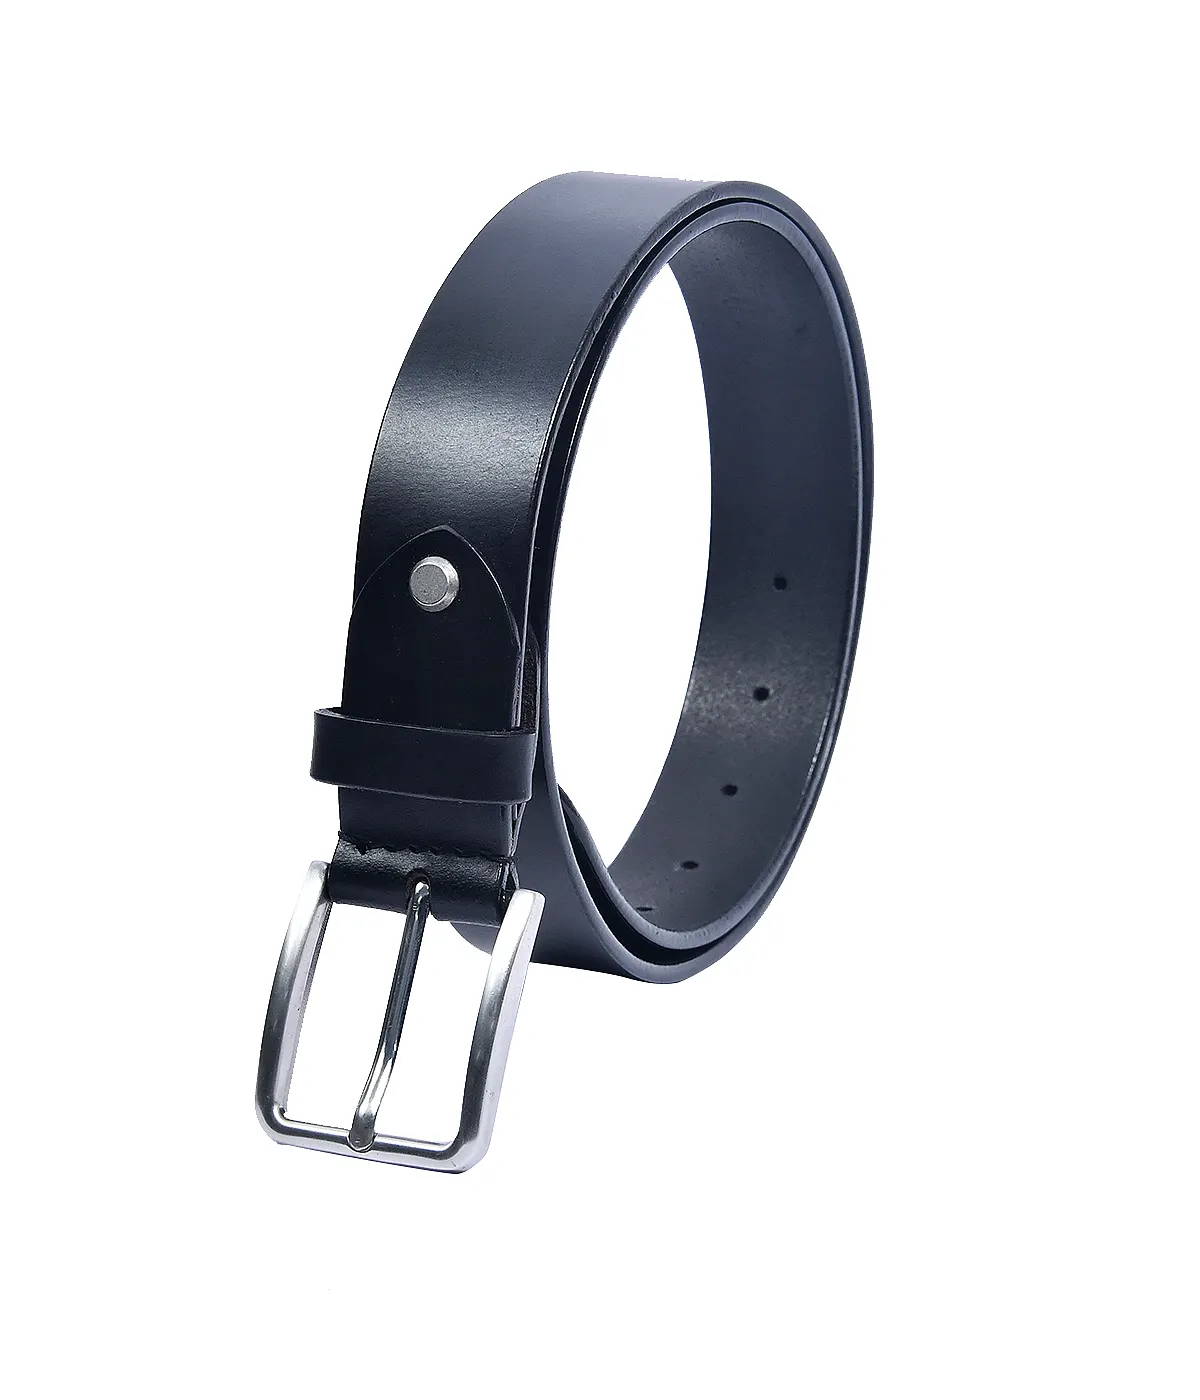 anam exim best pure black leather belt for men best price gift belt in wholesale price in india